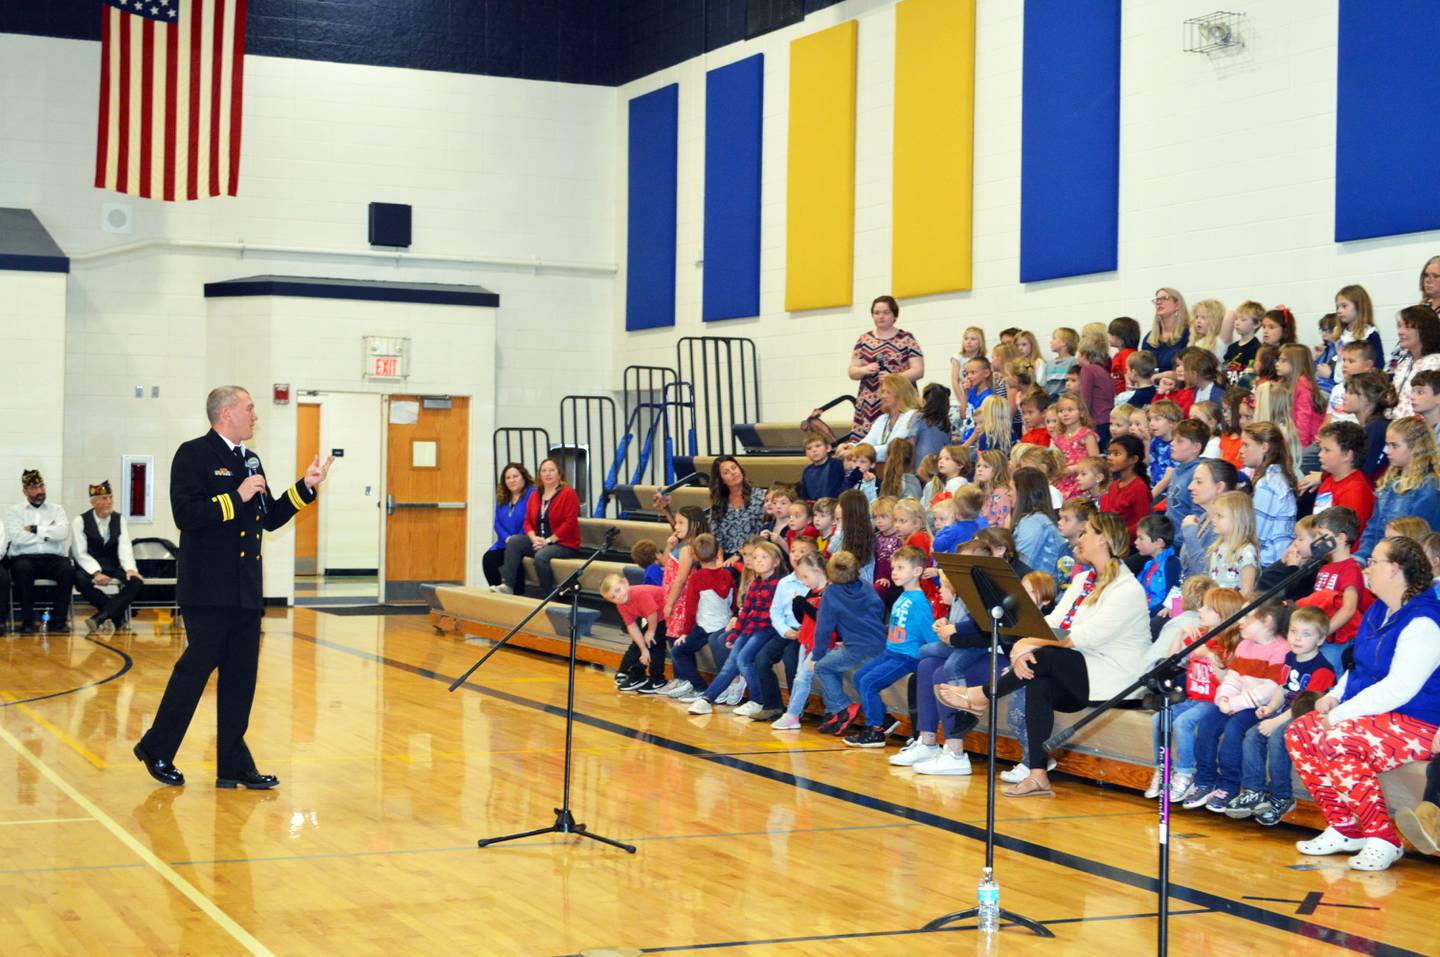 U.S. Navy Lt. Cmdr. Rick Knutson, of Polo, speaks to Centennial Elementary School students on Nov. 11, during a Veterans Day ceremony. In addition to students, more than 100 people from the public attended the event.